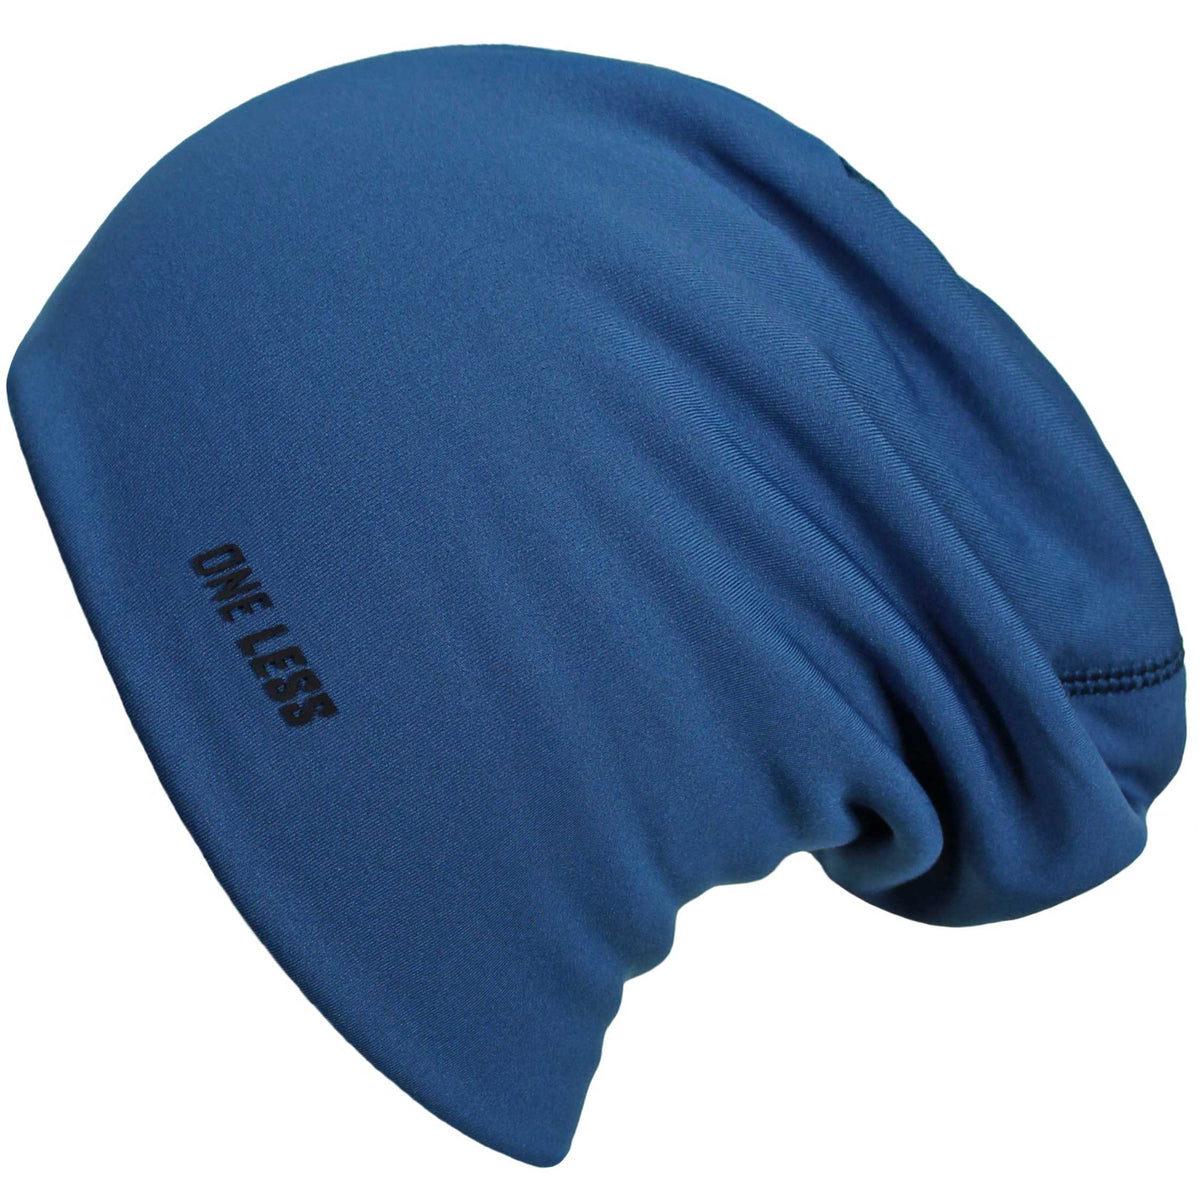 Mens XL Performance Supply Beanie and Fleece - Fifth Flex - Outlier King The